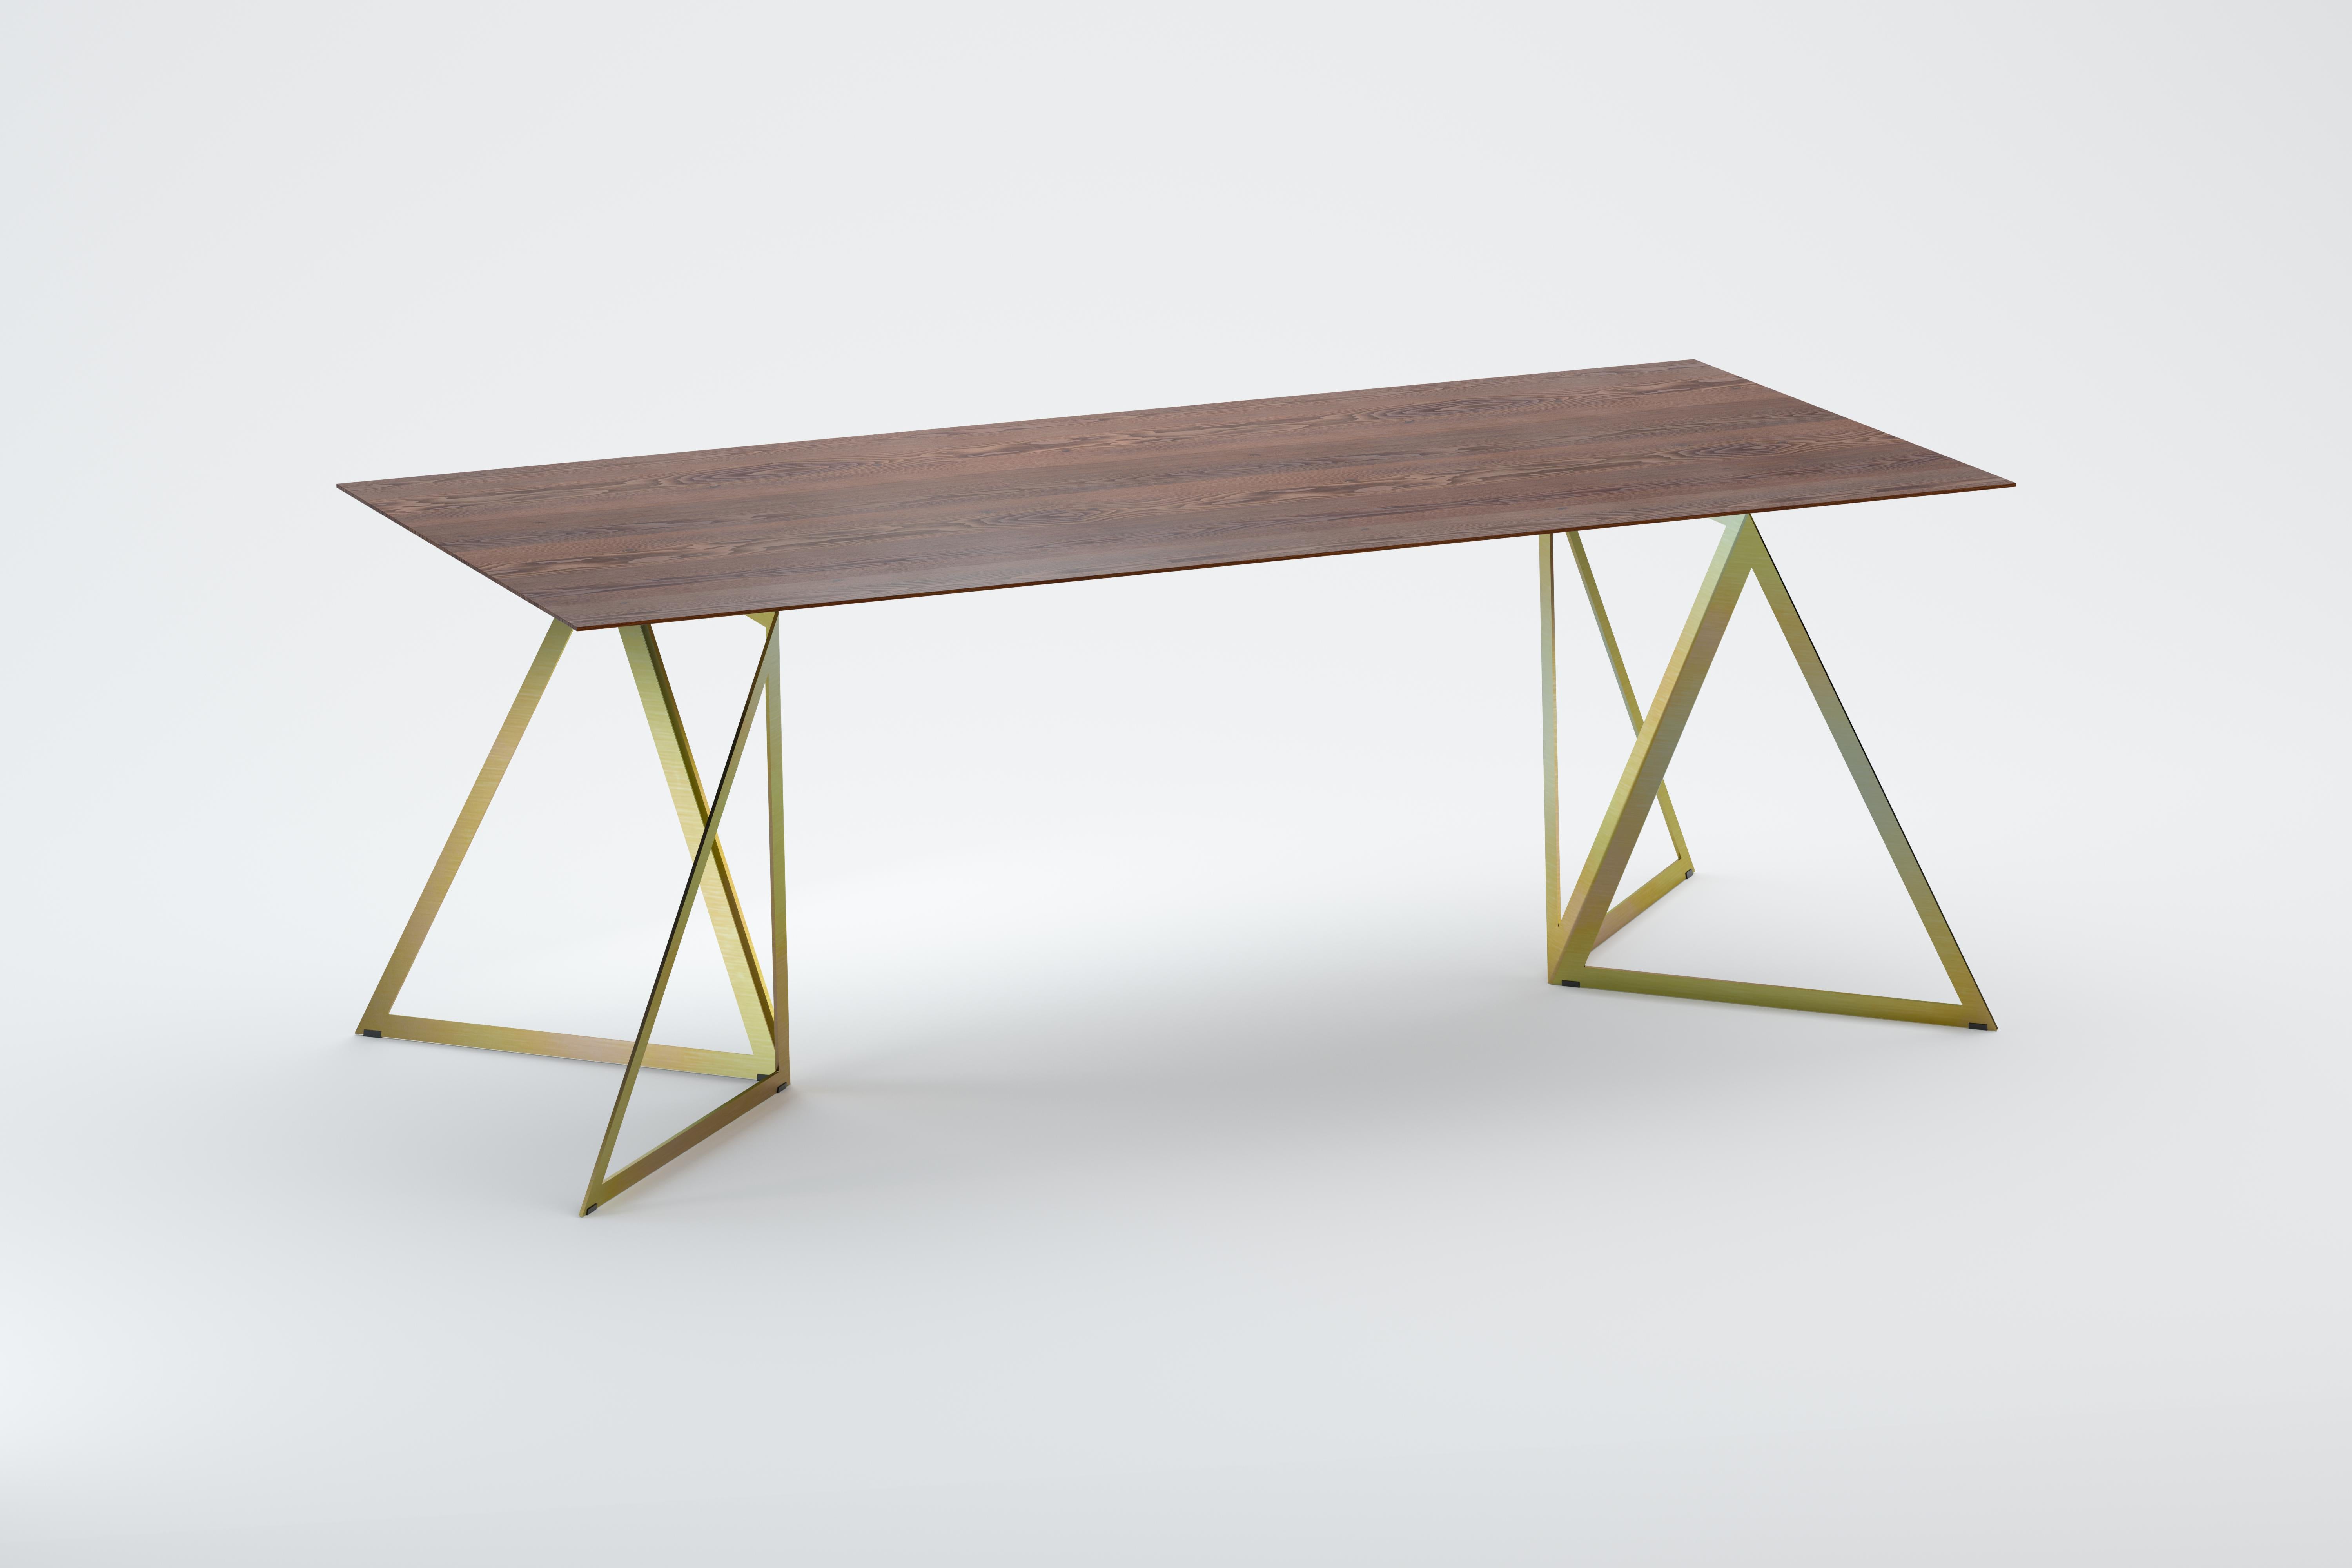 Steel stand table 200 Walnut by Sebastian Scherer
Dimensions: D200 x W90 x H74 cm
Materials: Walnut, Steel, Wood
Also Available: Colours:Solid wood (matt lacquered or oiled): black and white stained ash / natural oak / american walnut
Steel